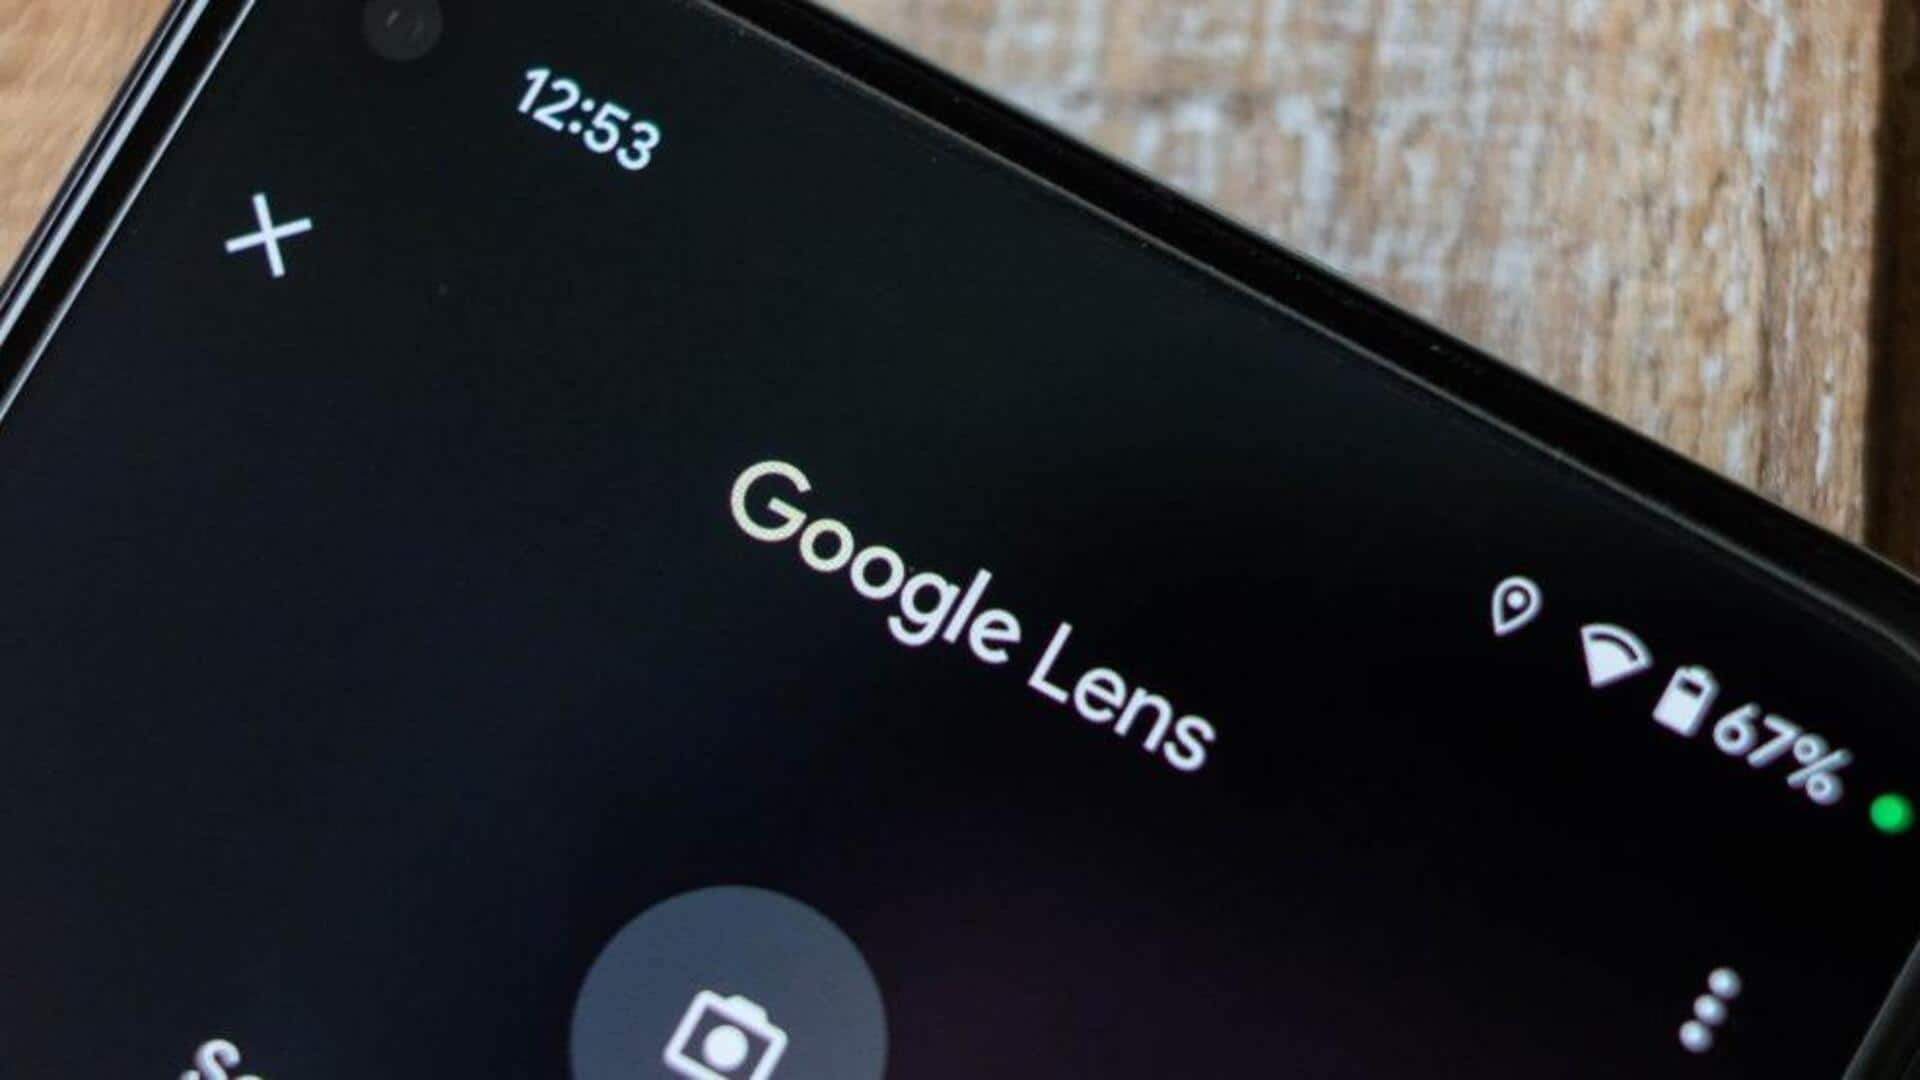 YouTube integrates Google Lens for visual search on Android